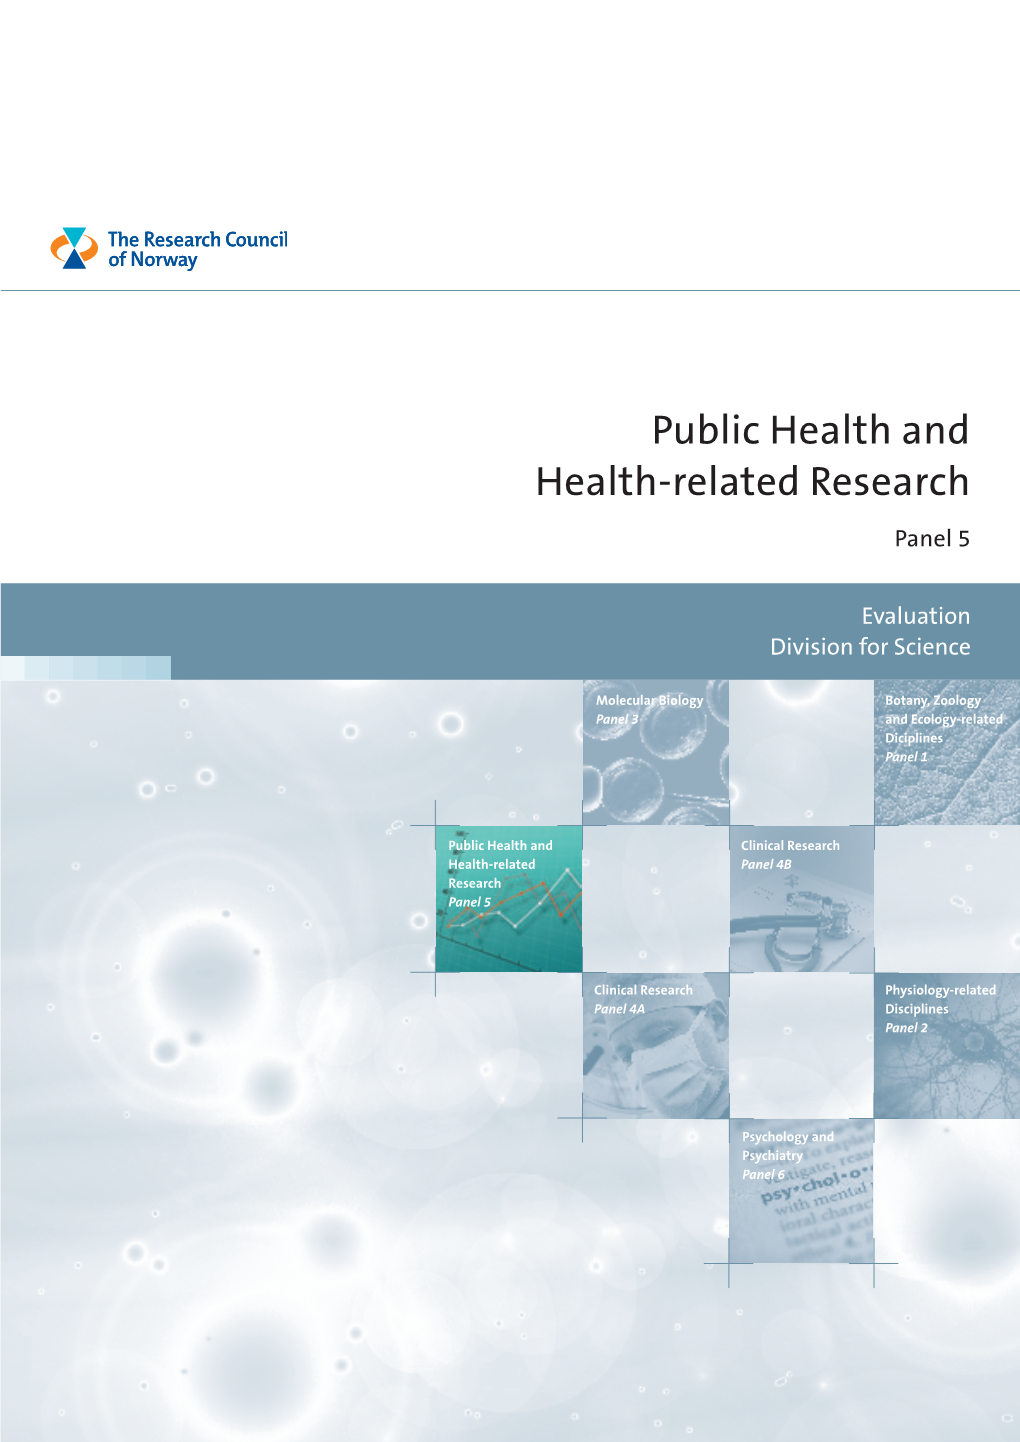 Public Health and Health-Related Research Panel 5